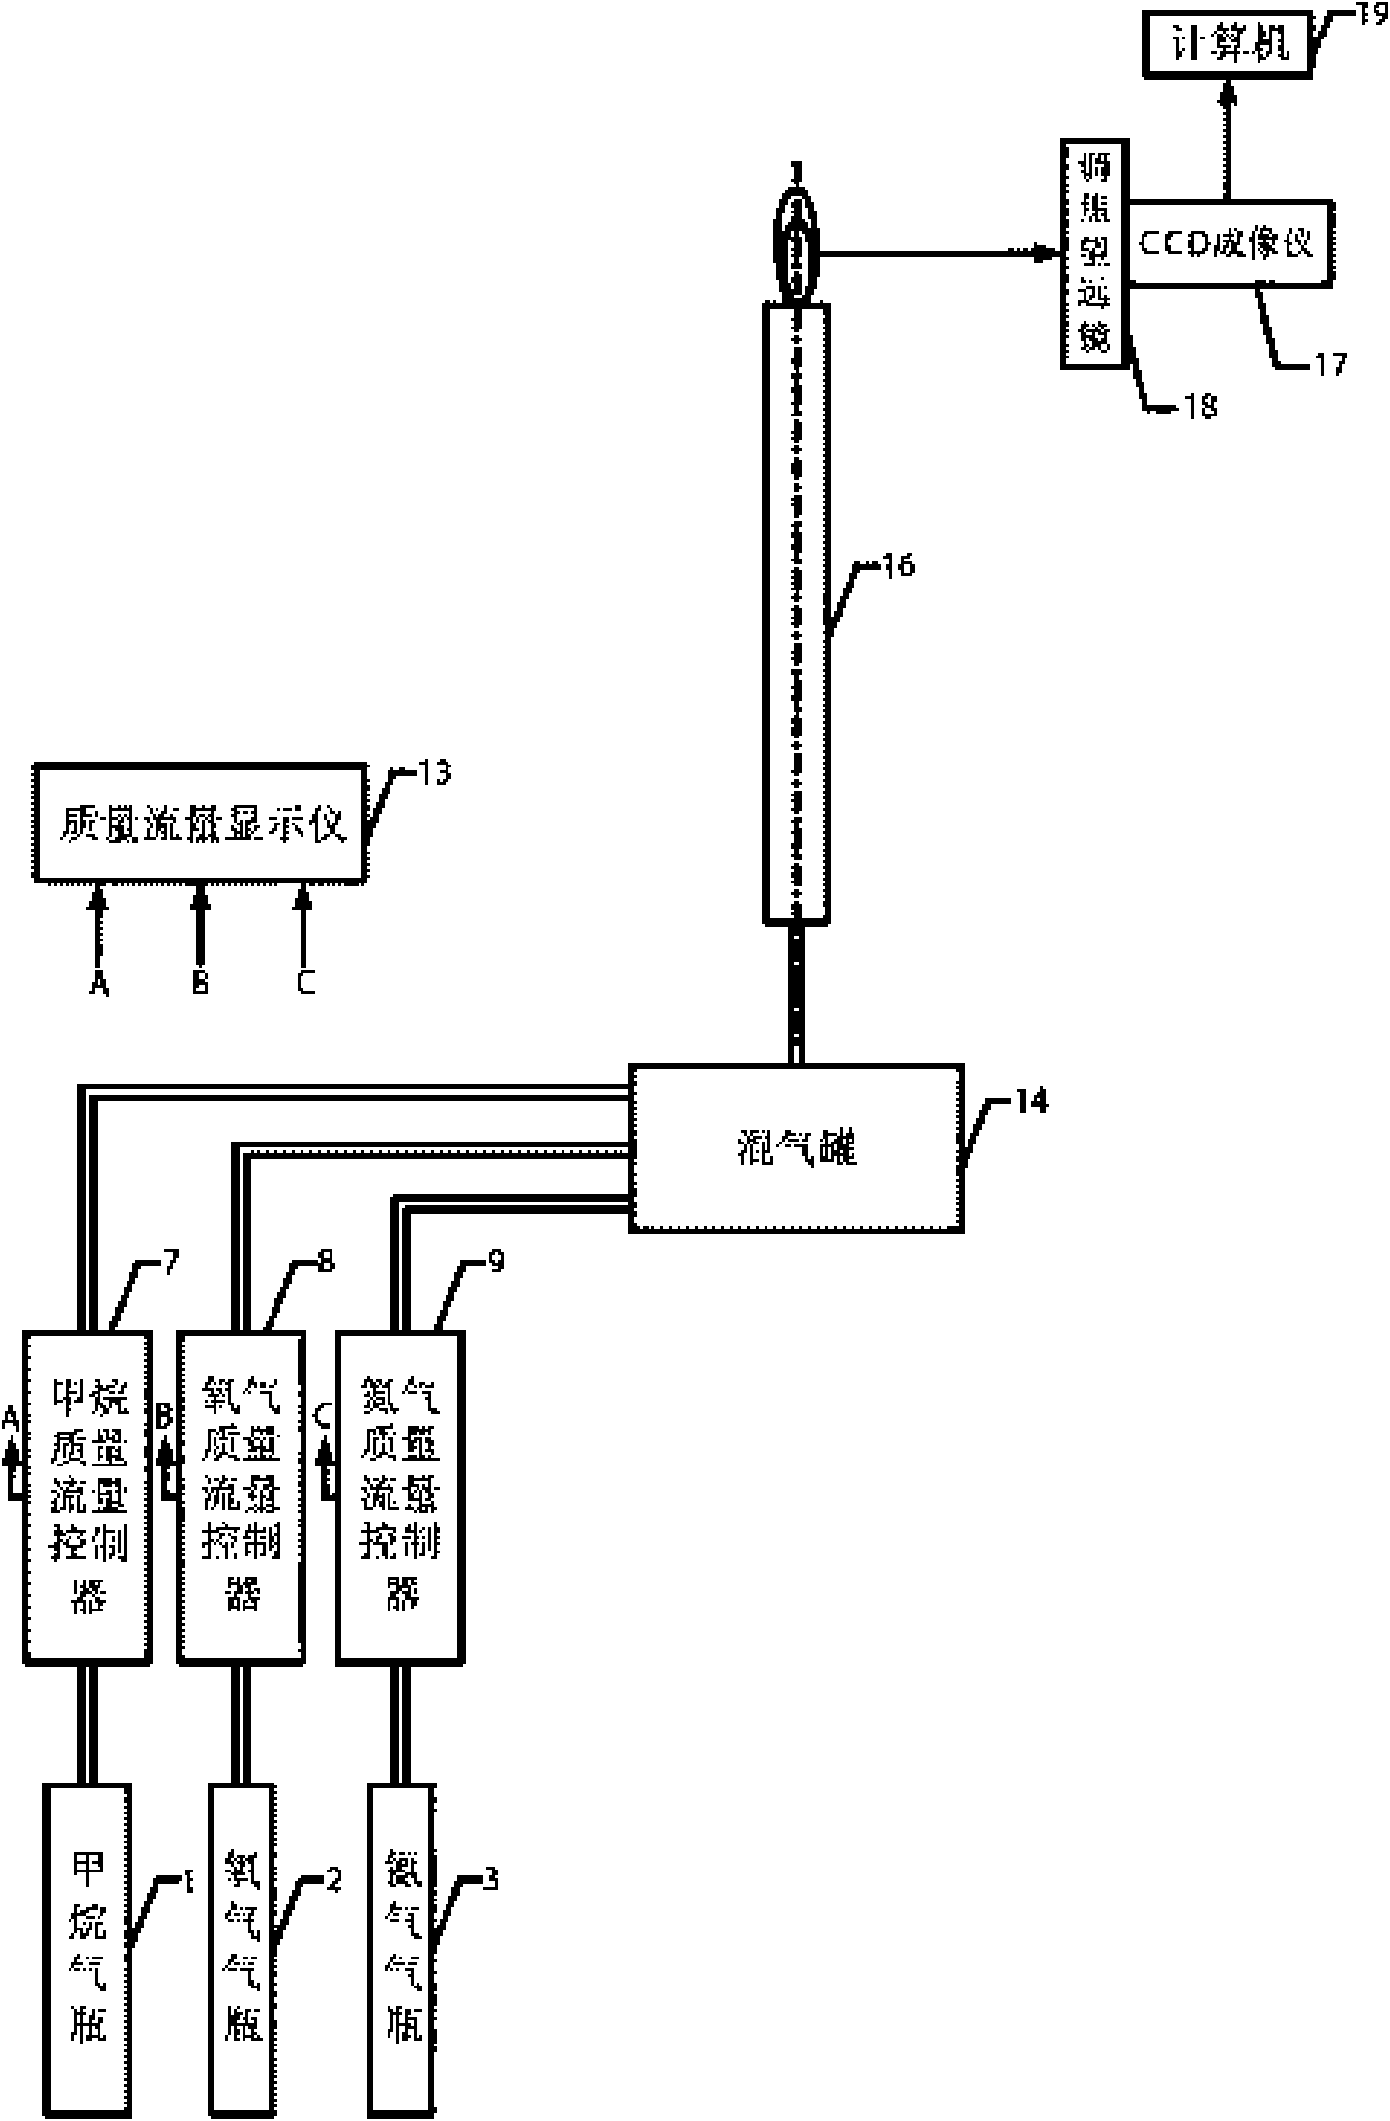 Method for measuring flame propagation velocity of Bunsen burner during combustion process of gaseous fuel